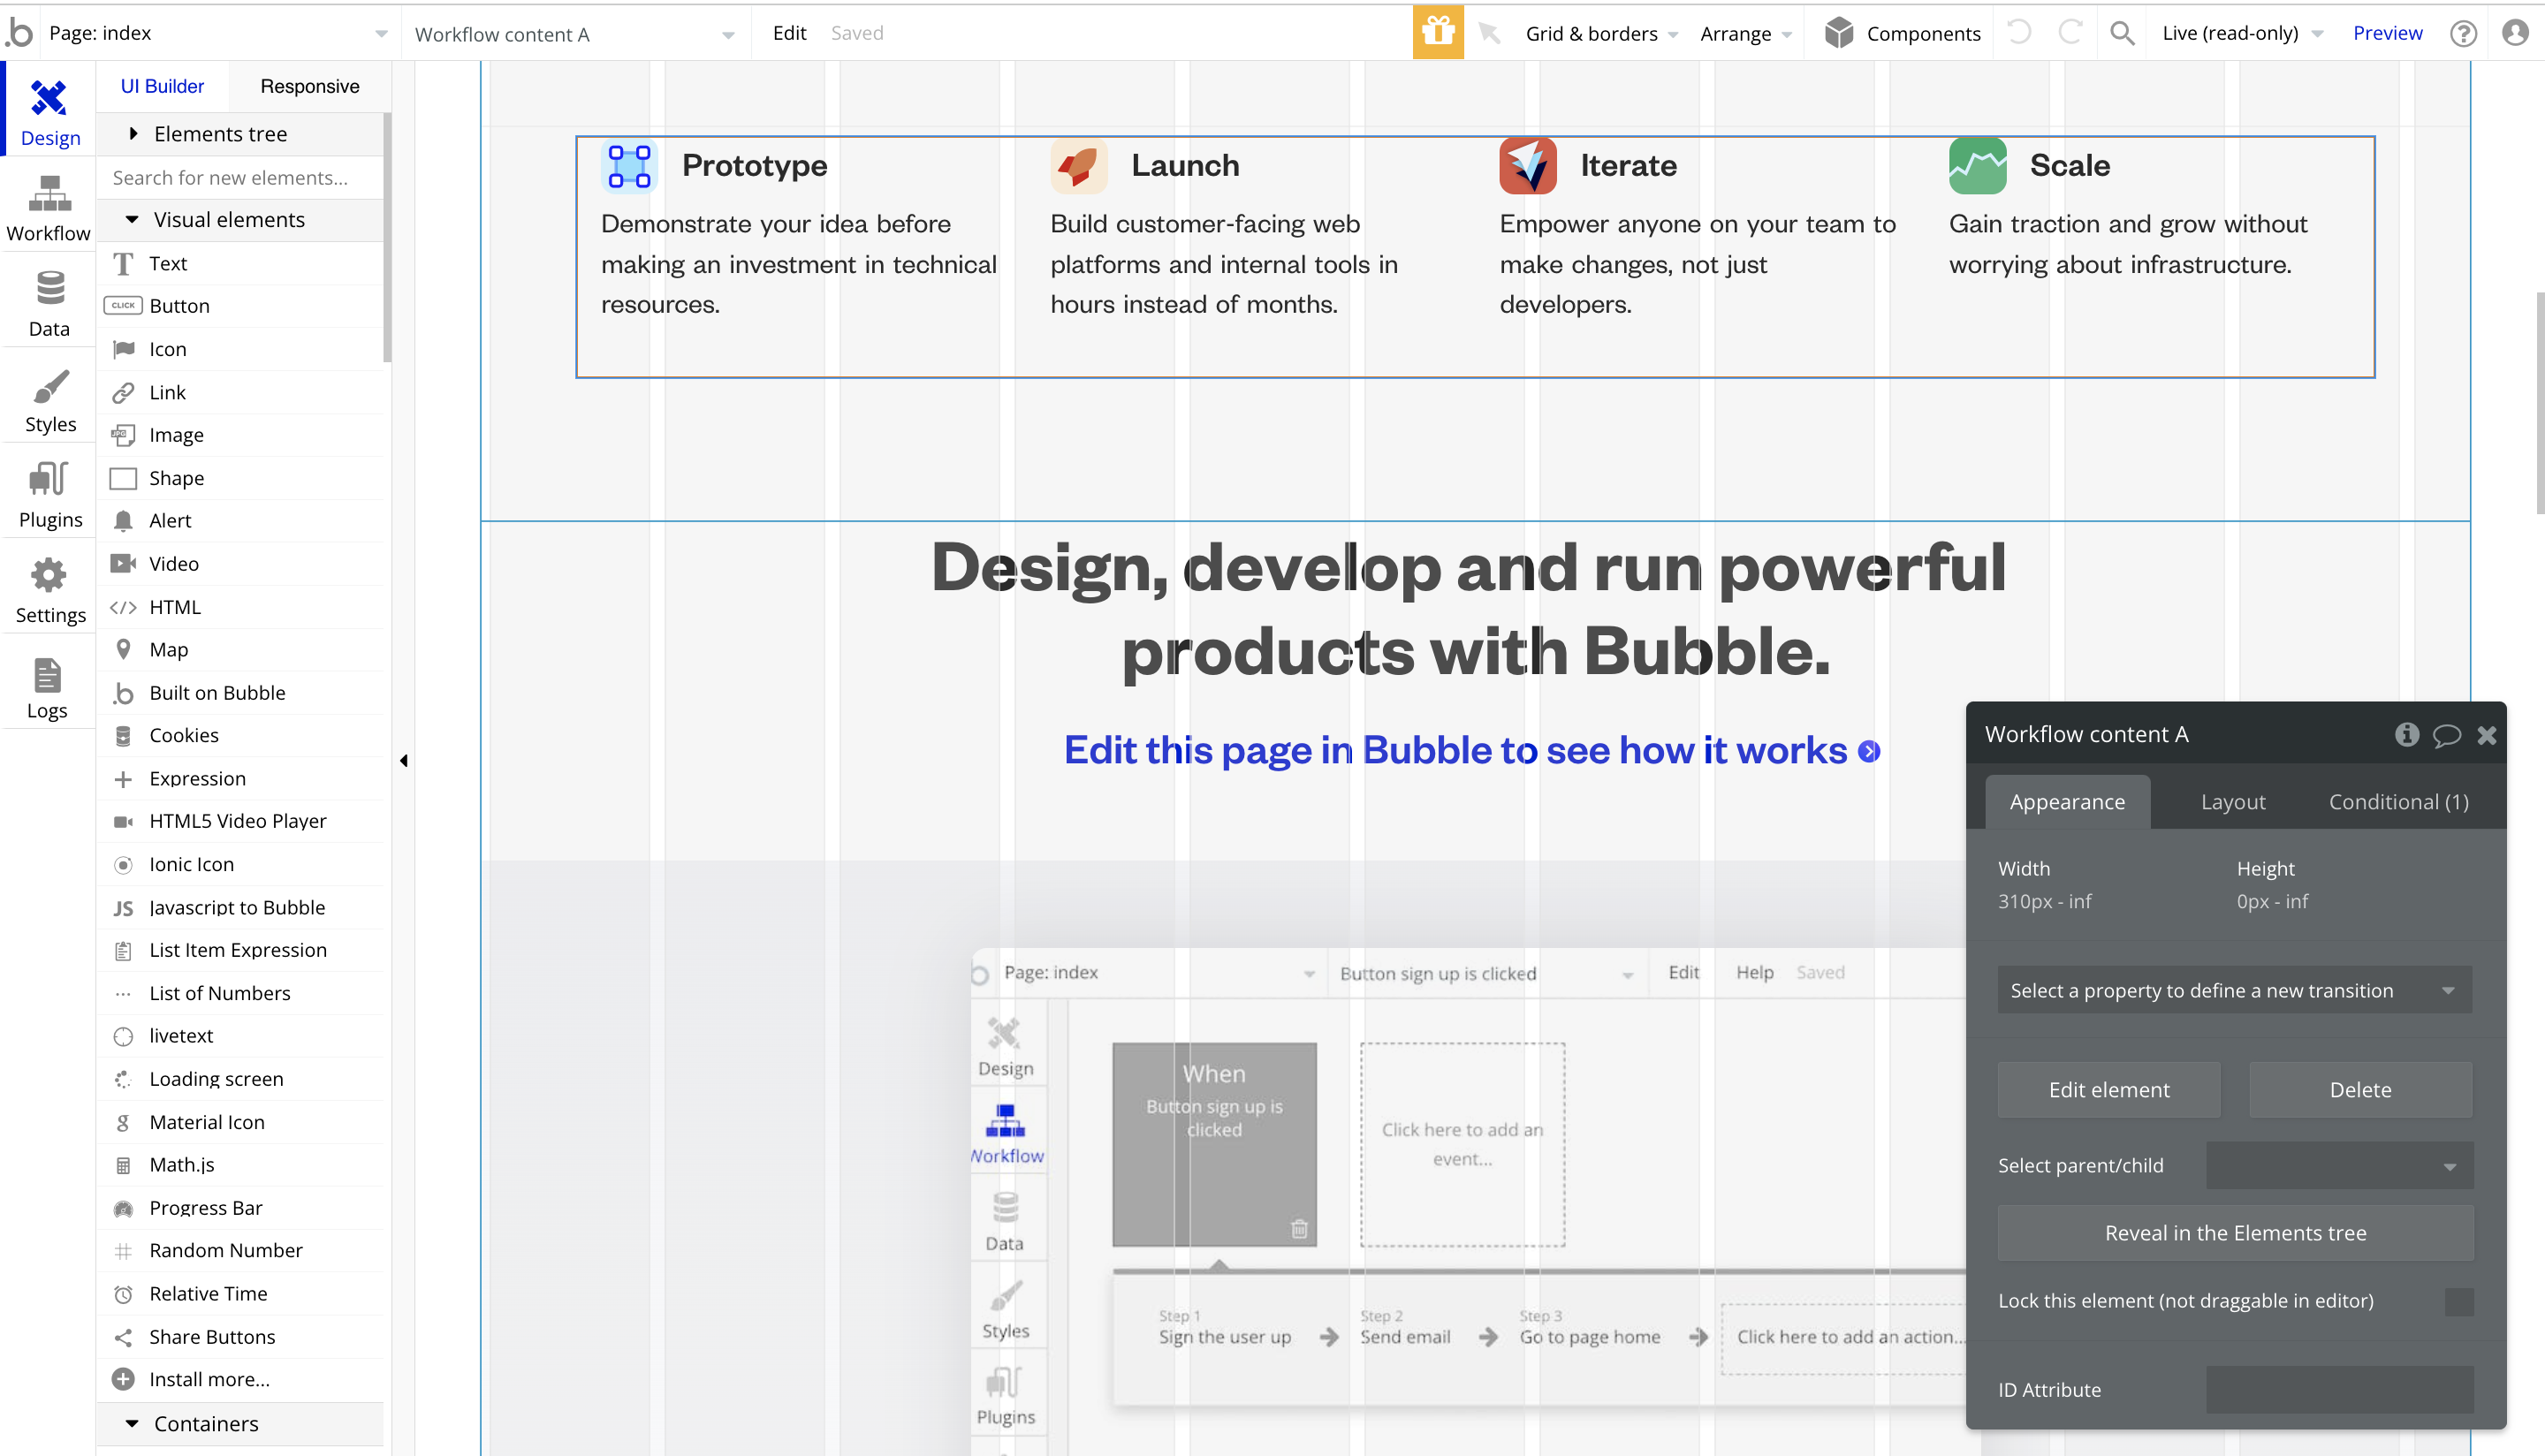 Bubble Software - Designed for teams of all sizes, Bubble enables you to bring any product vision to life – whether you're just starting with a minimum viable product, or scaling from a prototype to a mature business.